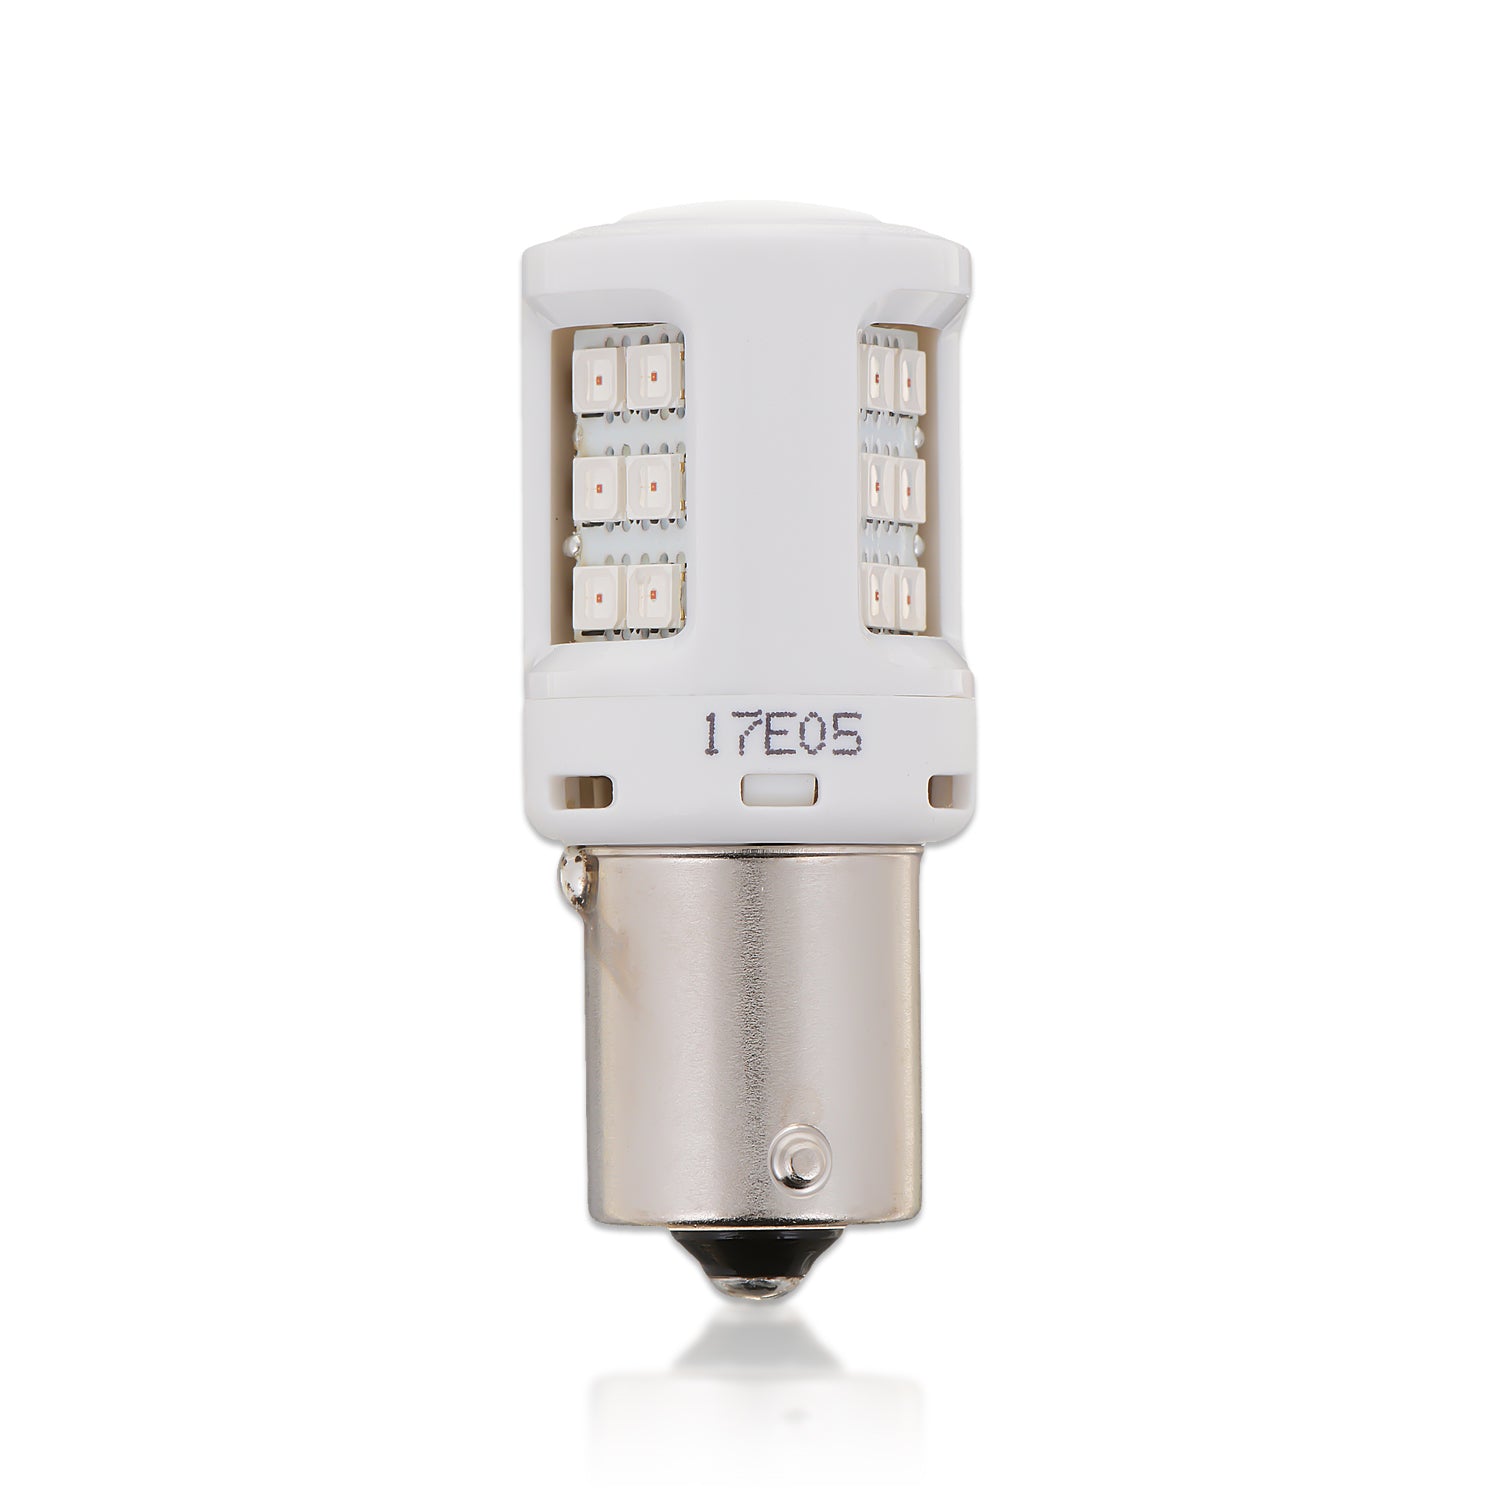 1156: Philips 1156UL White Red Amber LED Bulbs – HID CONCEPT